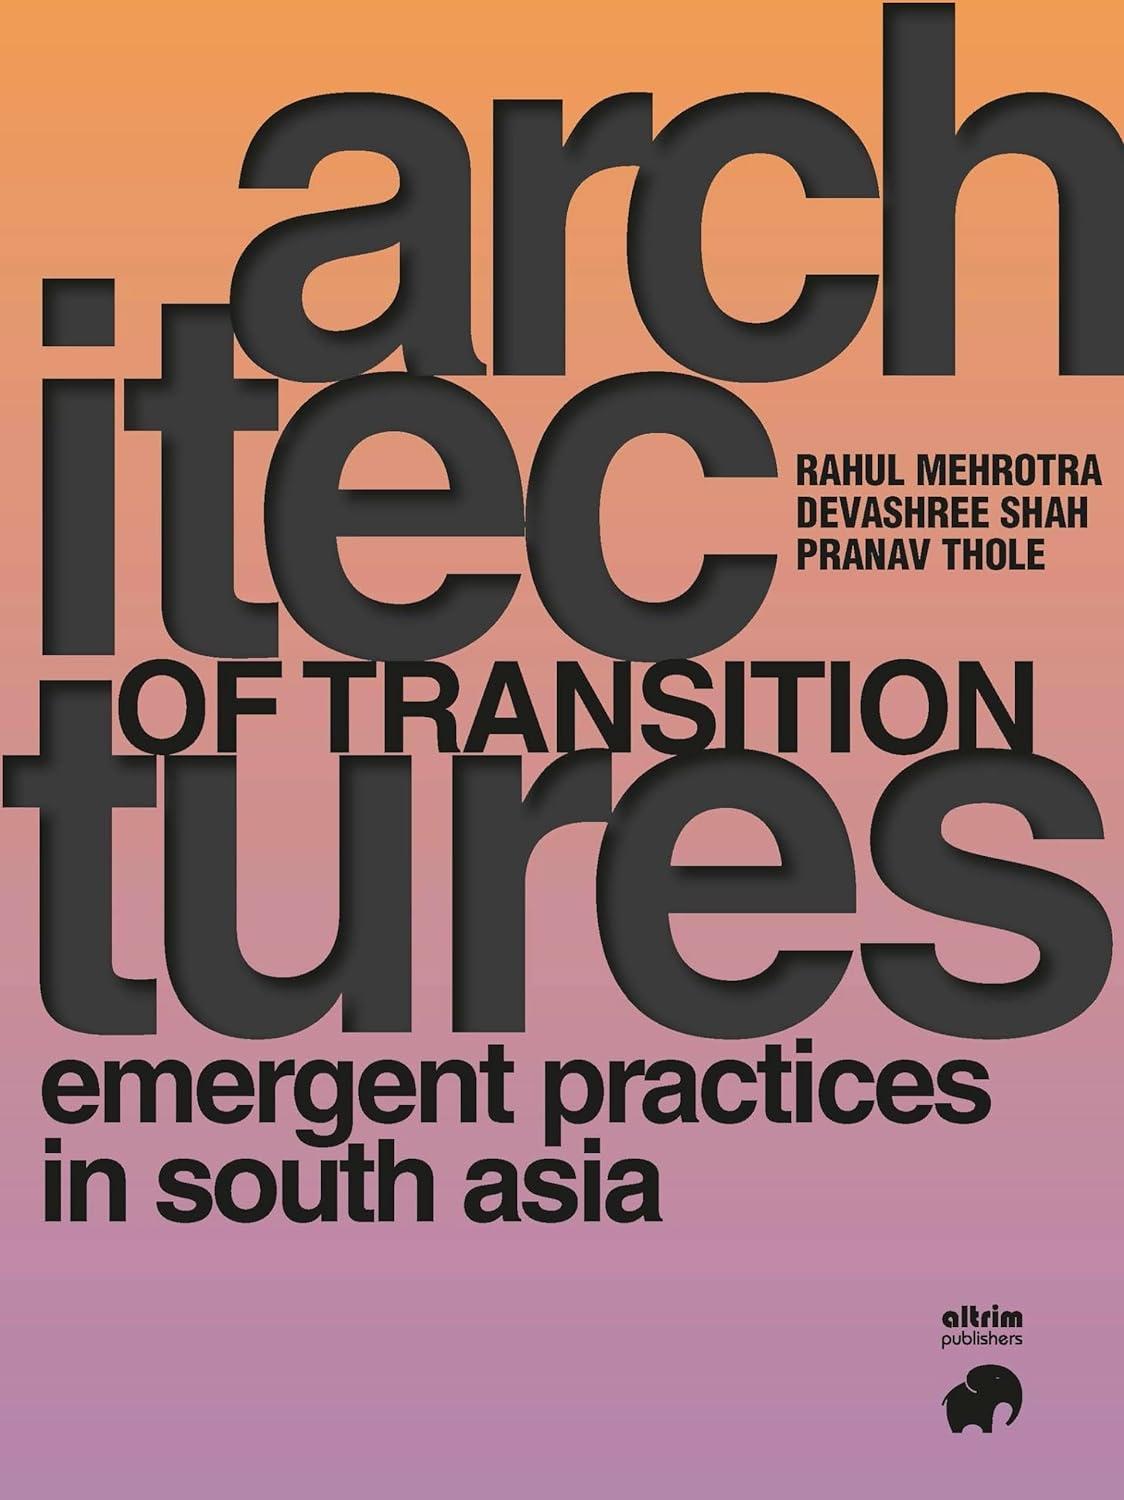 ARCHITECTURES OF TRANSITION, EMERGENT PRACTICES IN SOUTH ASIA